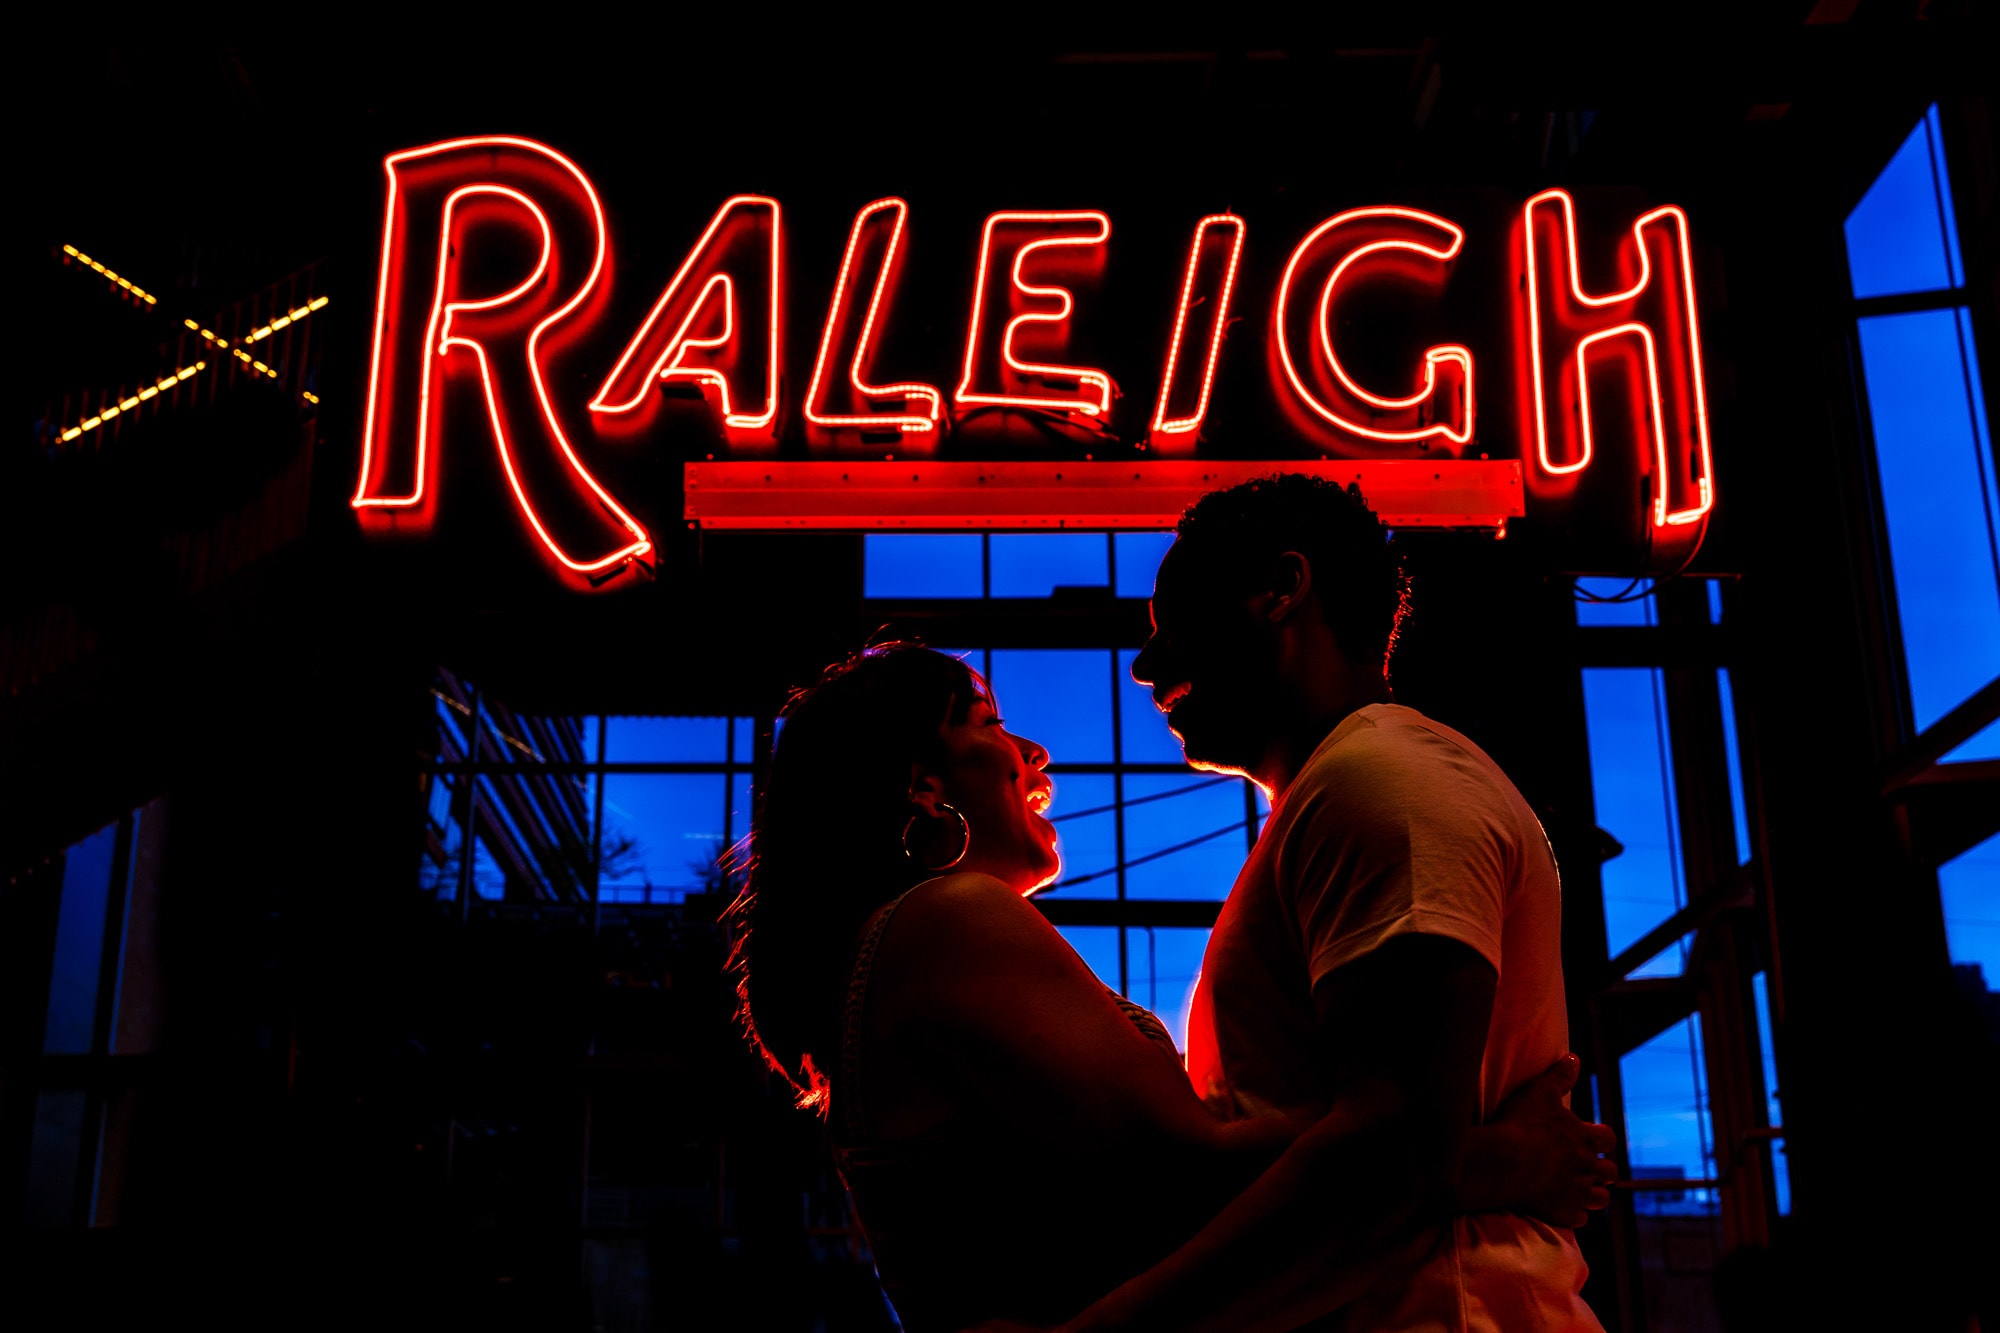 a couple is back lit by a red neon sign that says 'Raleigh'; behind them the sky is vivid blue during blue hour after the sunset